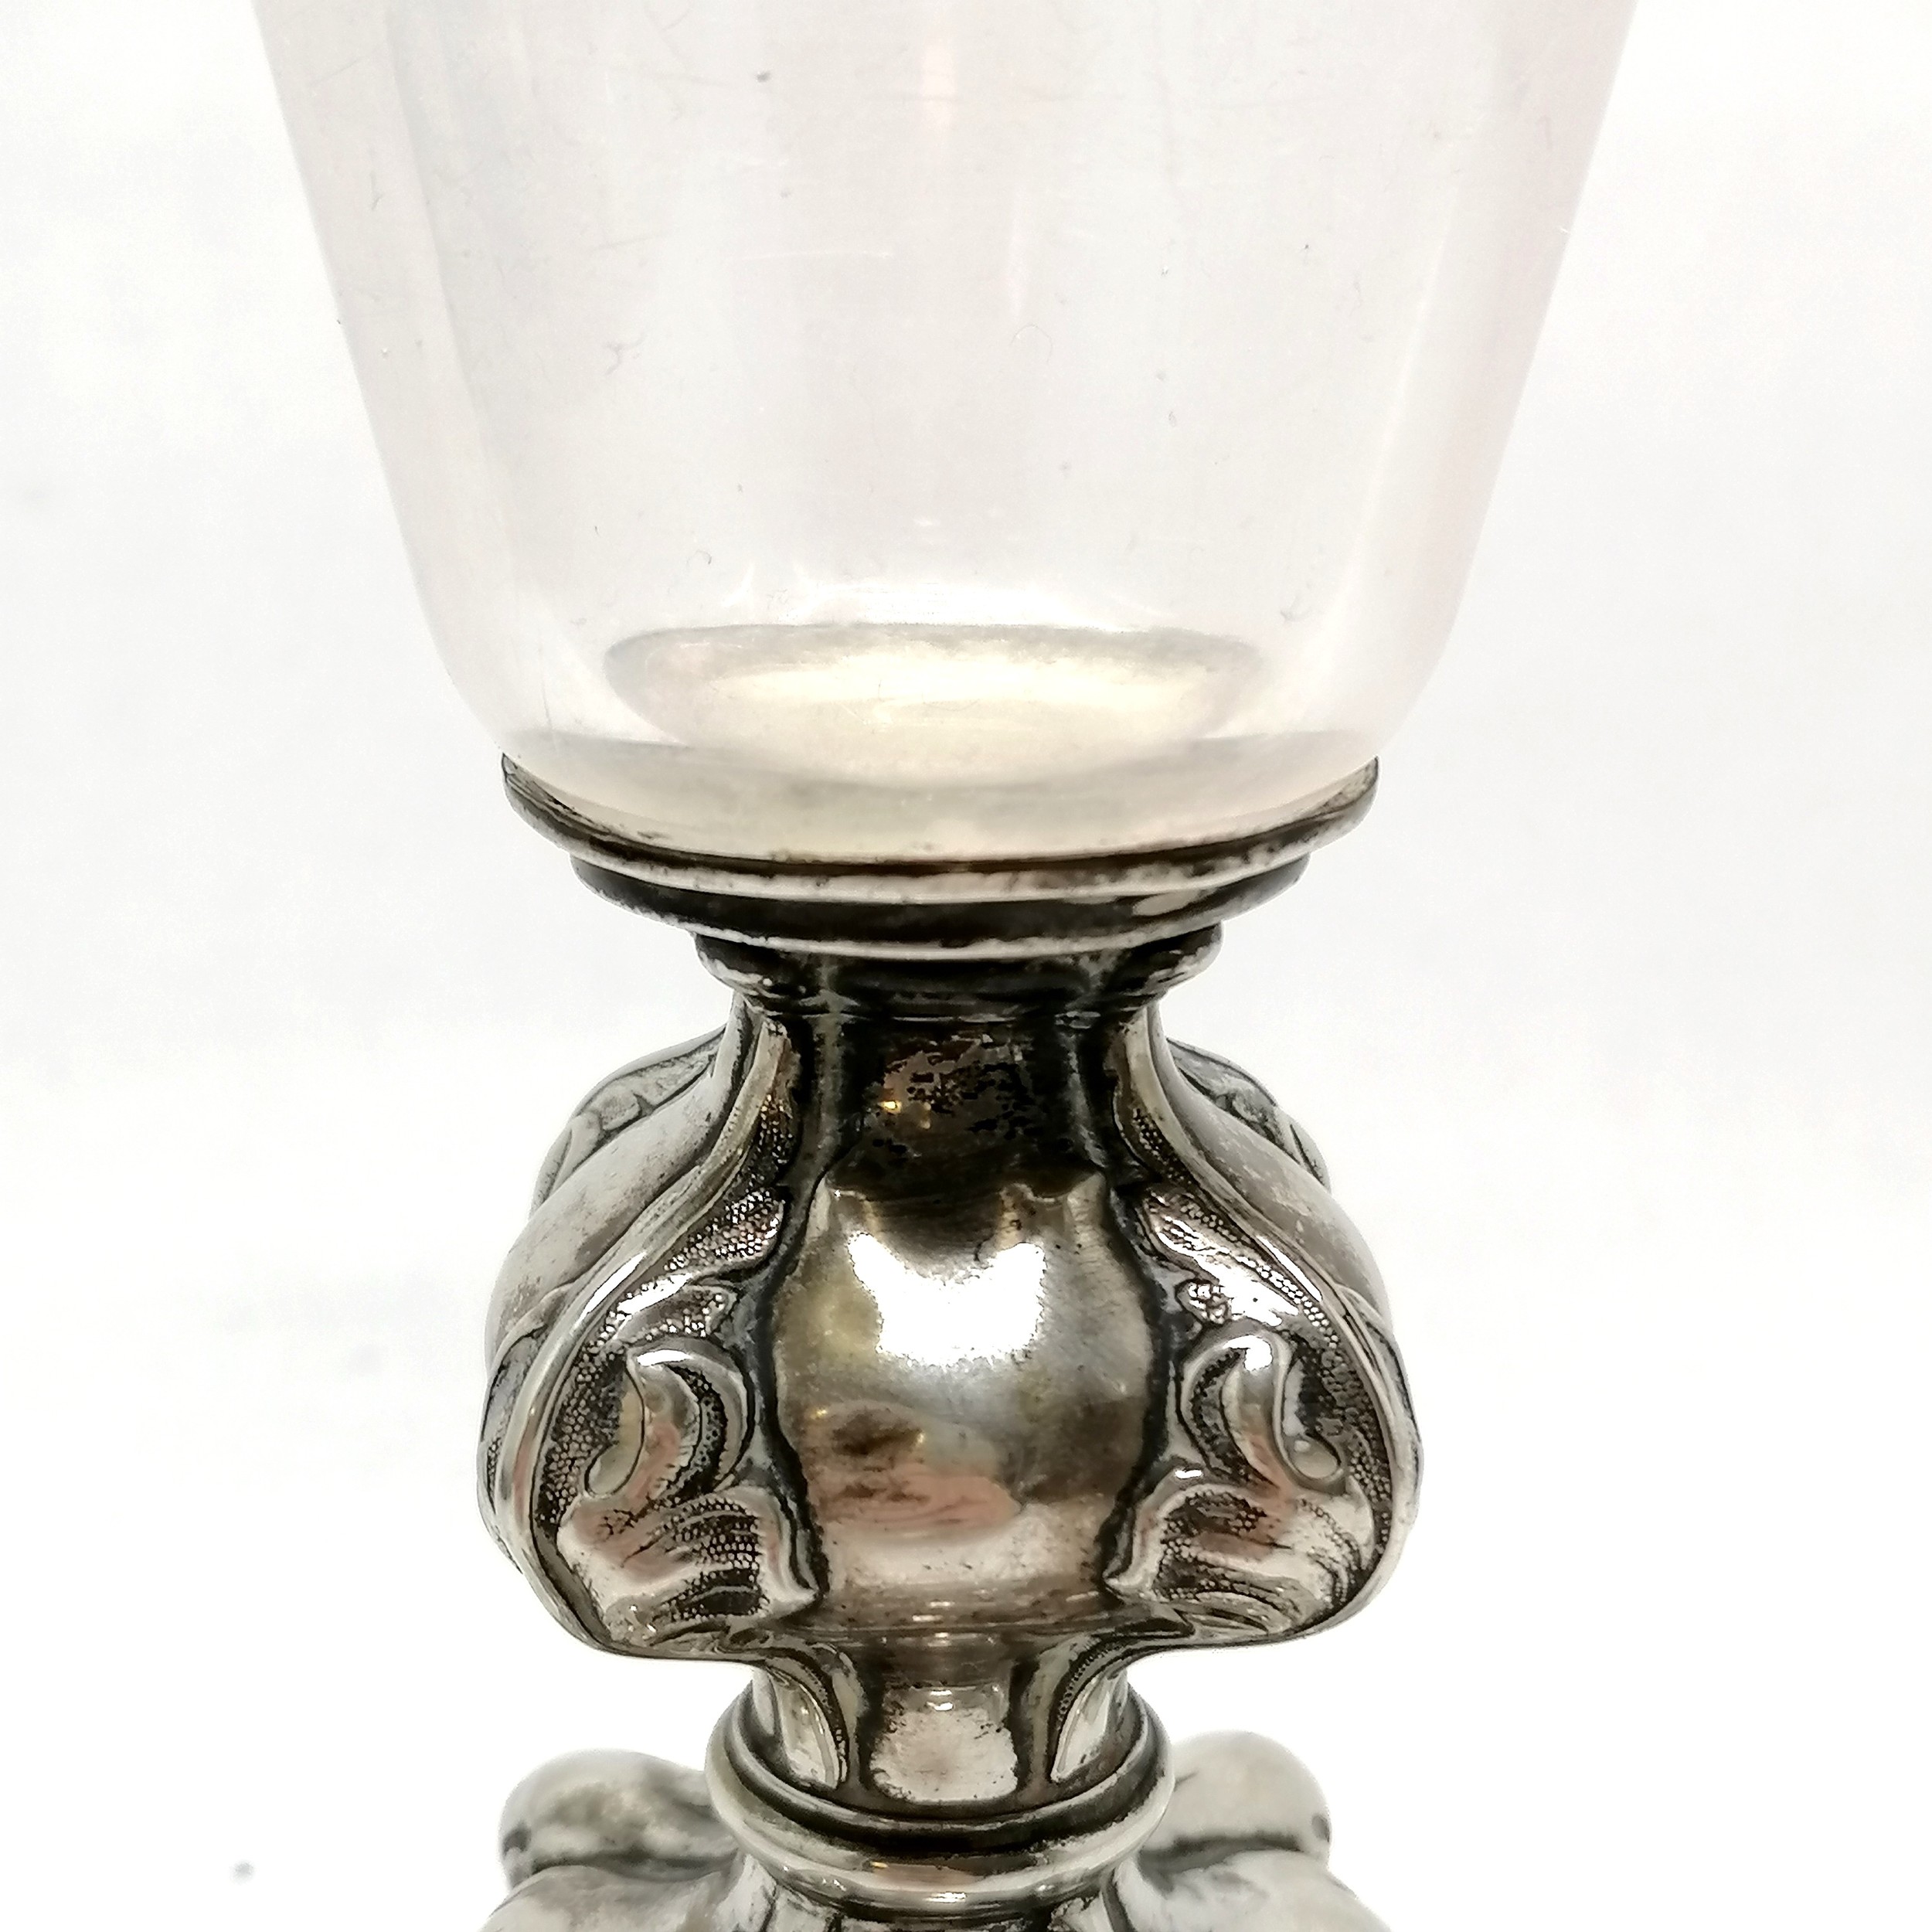 Antique silver plated vessel with antique glass bowl - 25.5cm high ~ has obvious wear - Image 3 of 4